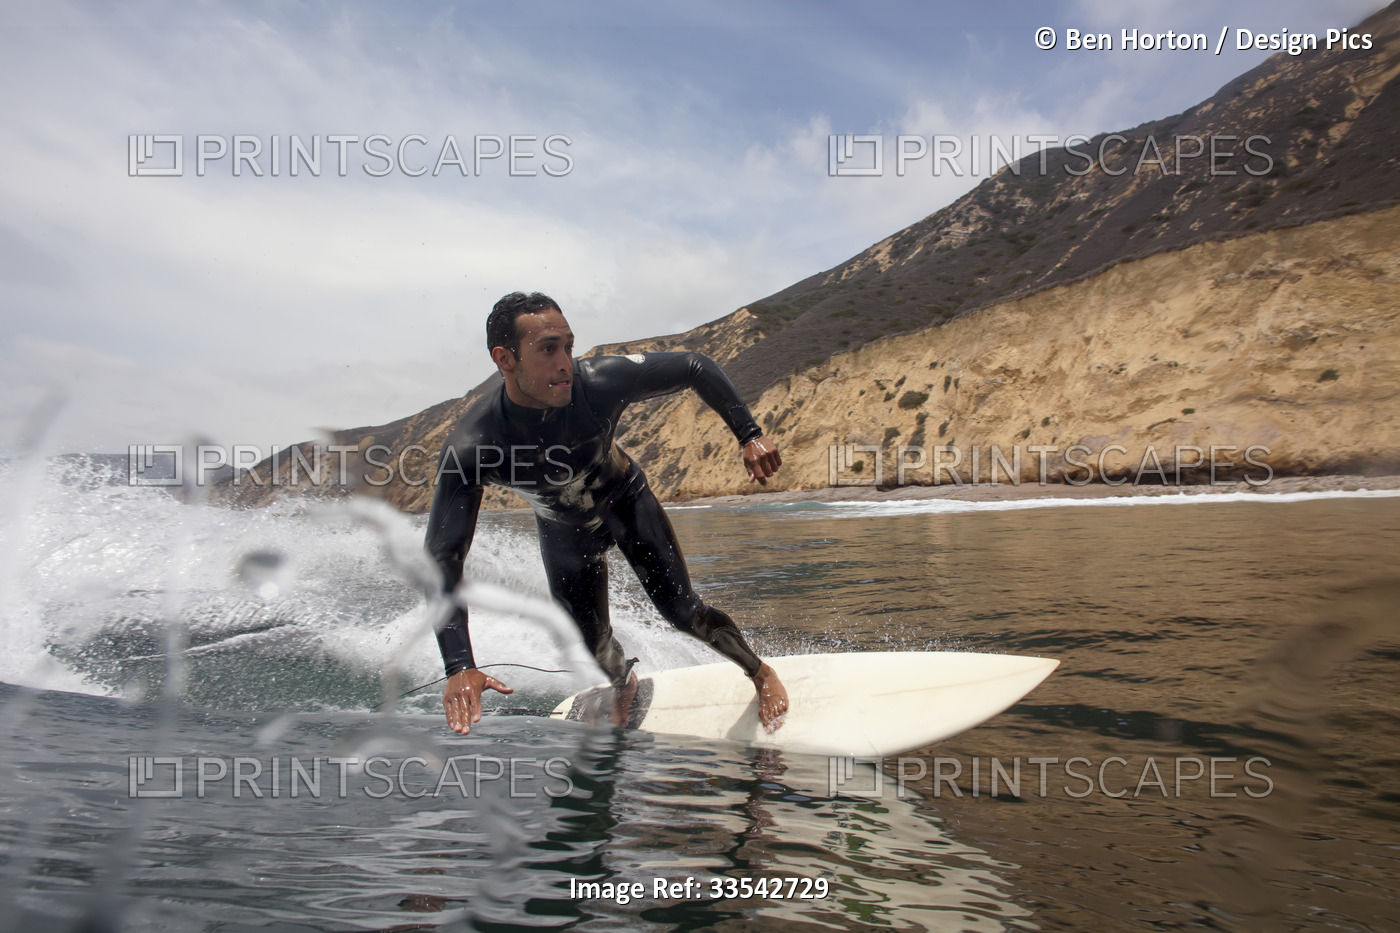 A surfer makes a bottom turn in the cold water of the Channel Islands.